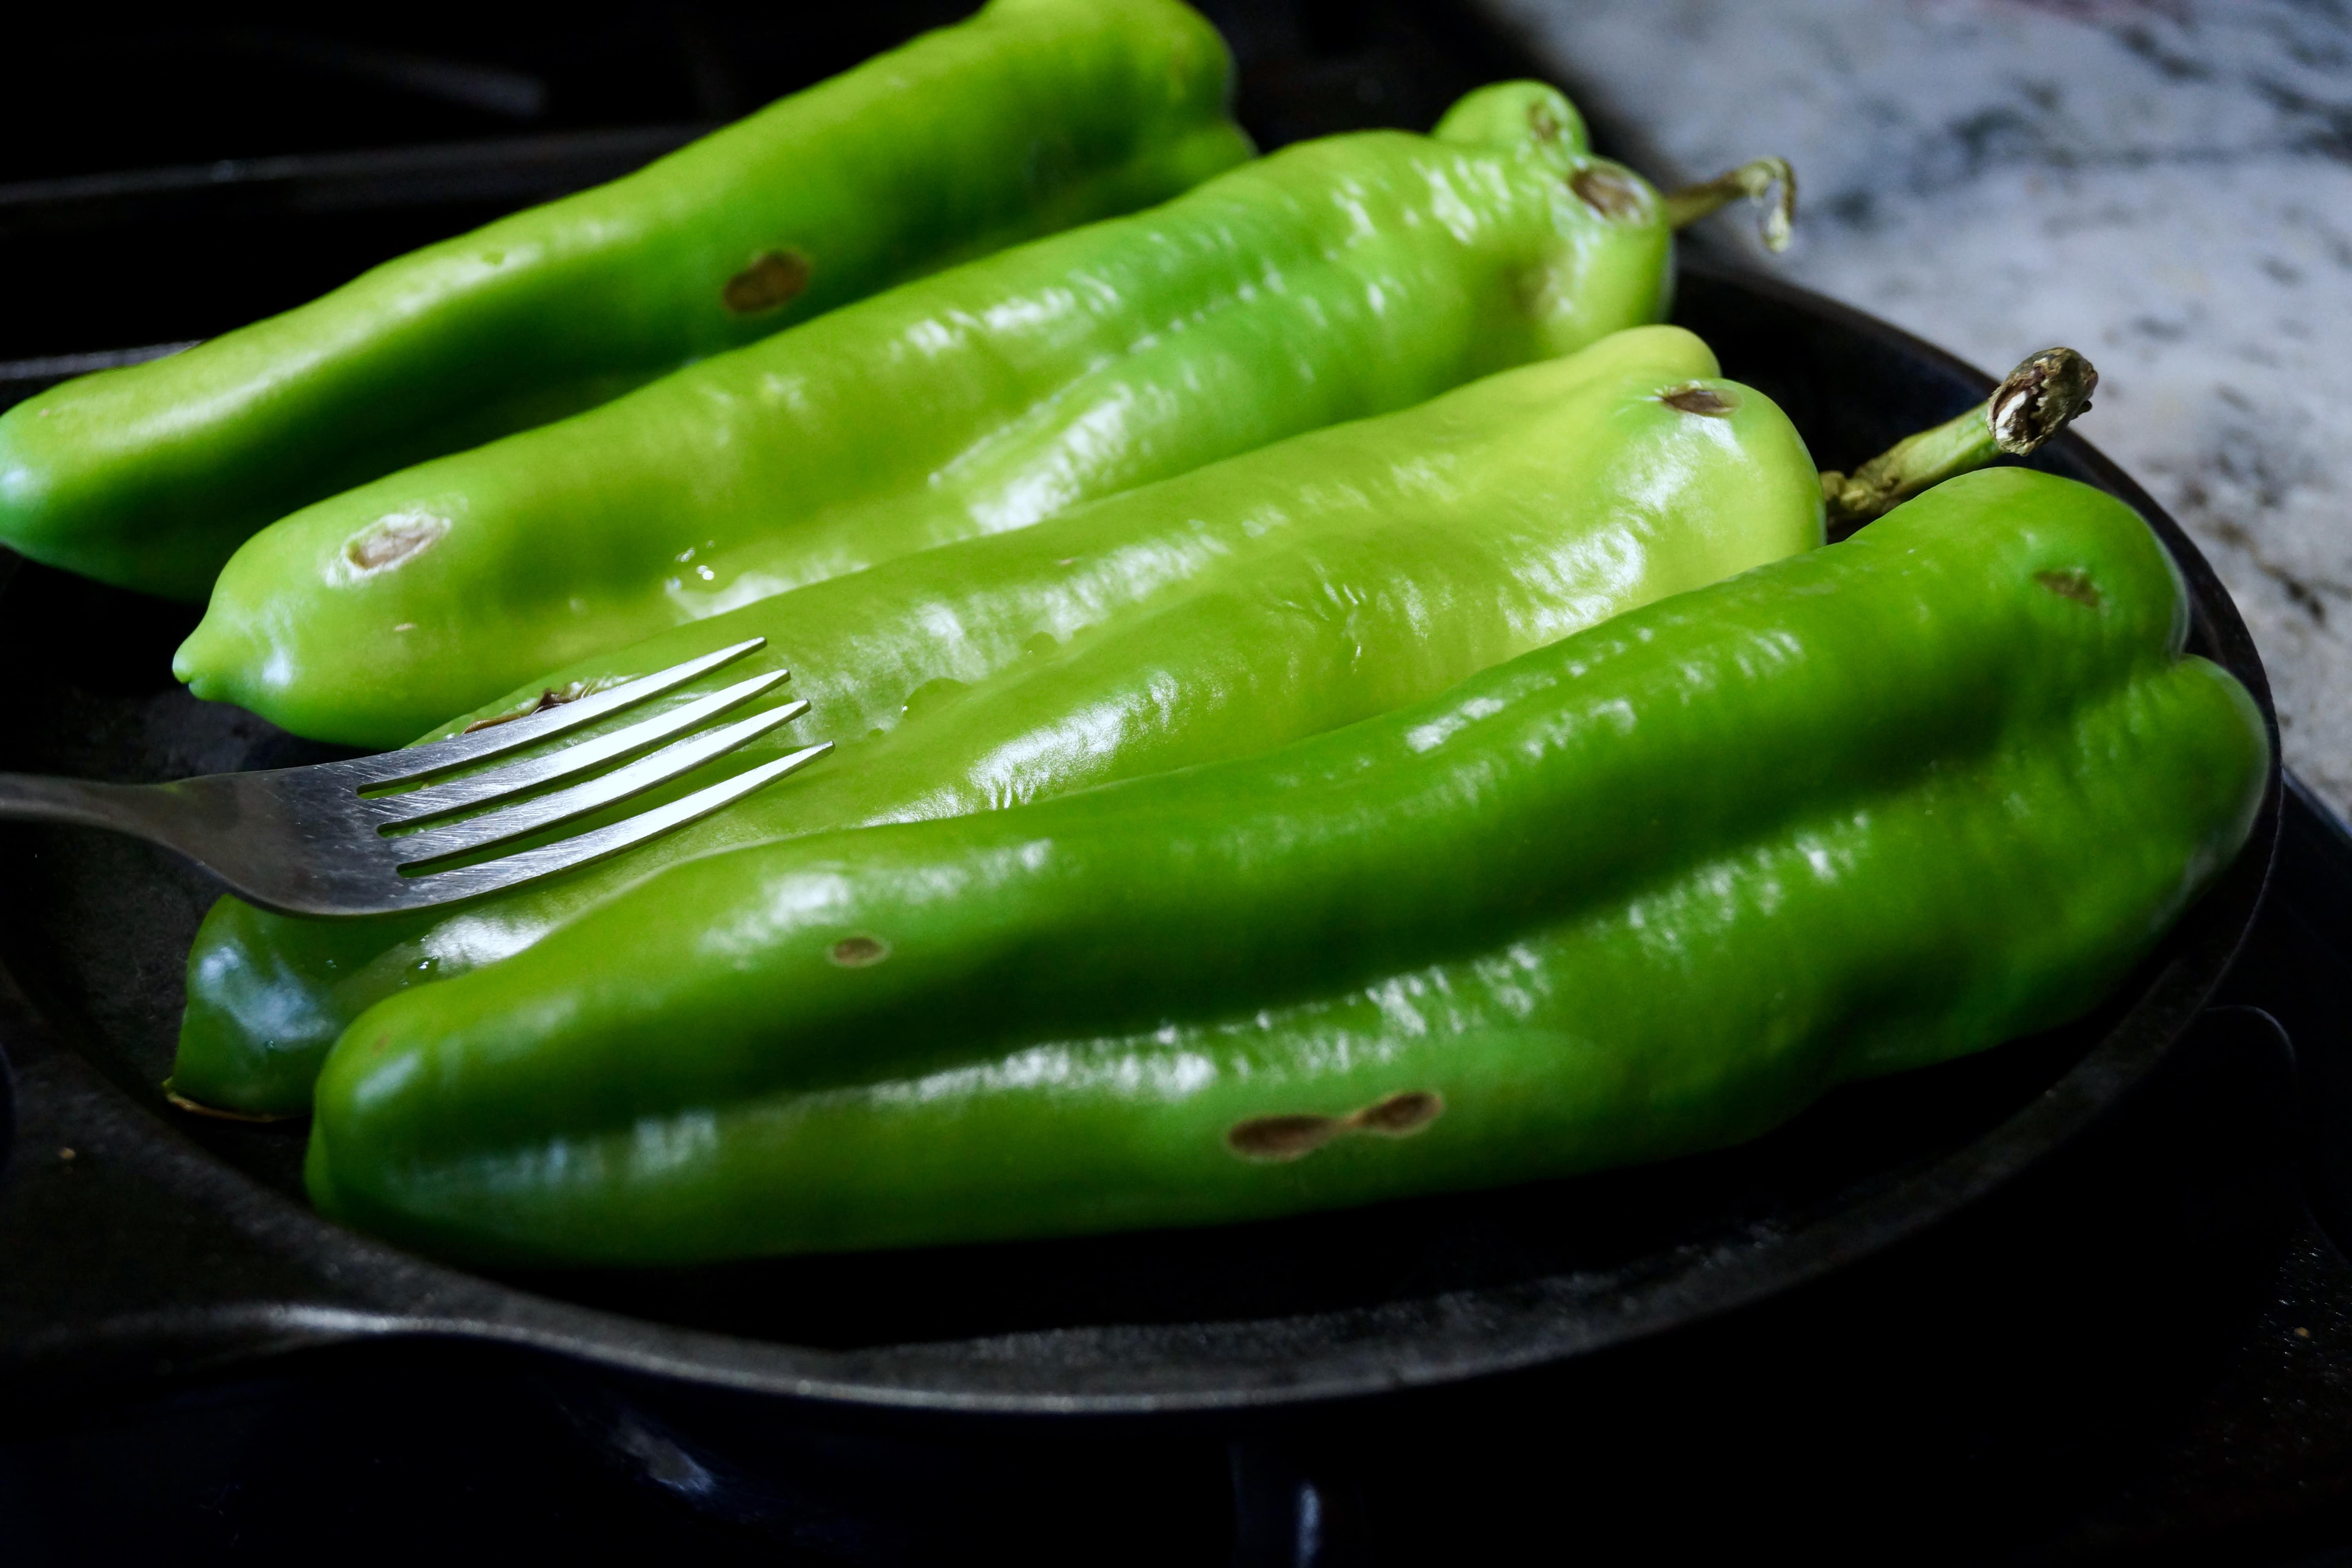 Simple ways to roast green chiles at home #roastedgreenchiles